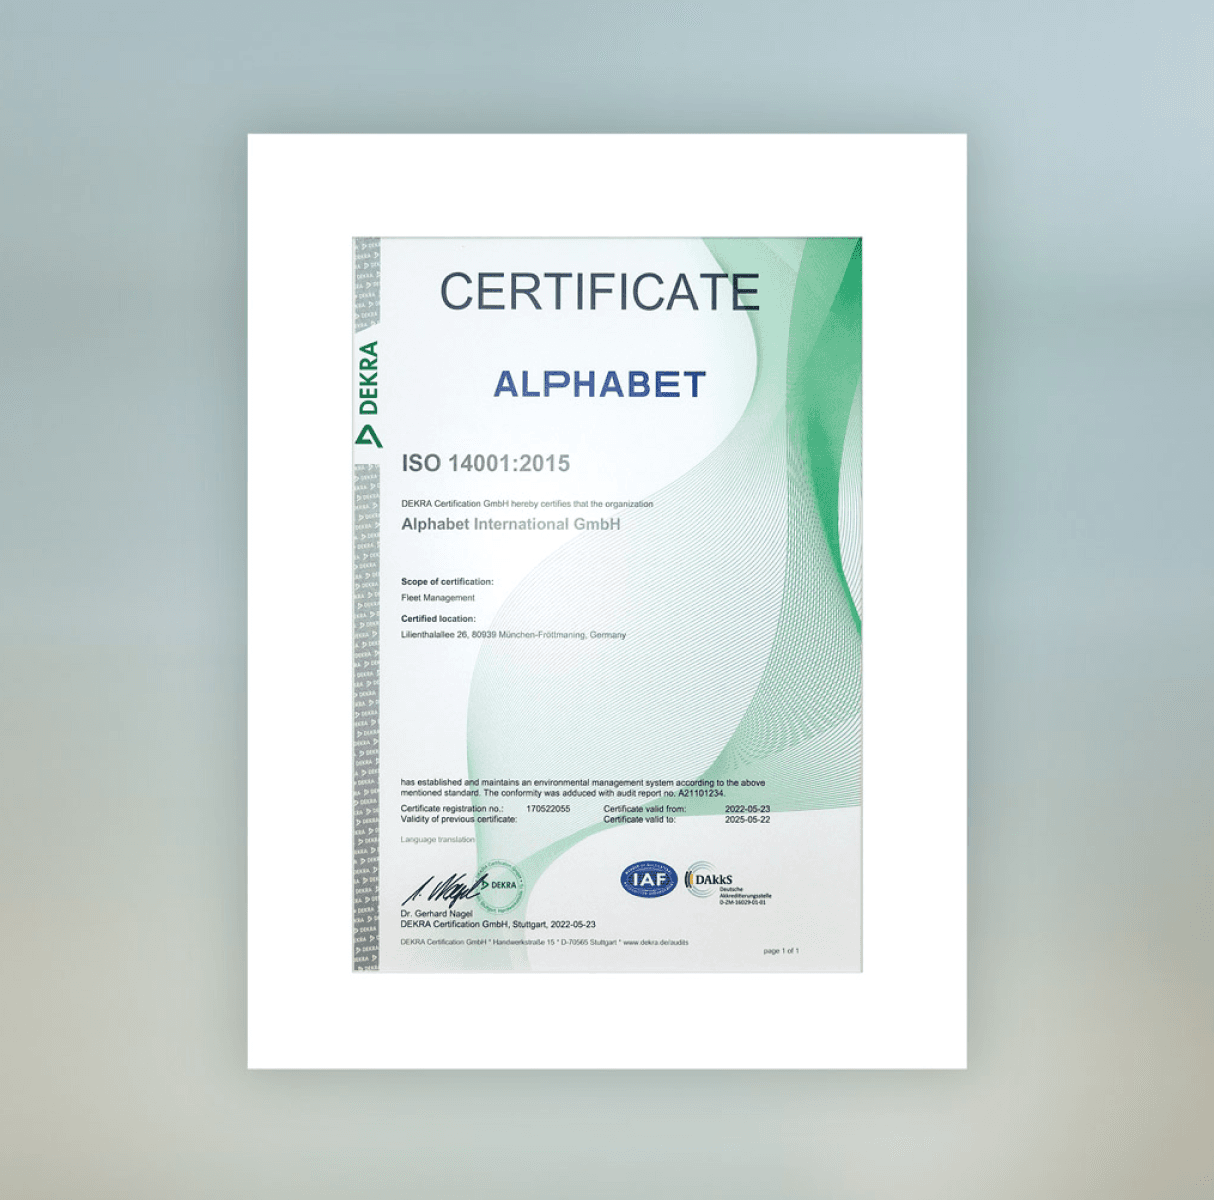 Alphabet Certificate of an environmental management system ISO 14001